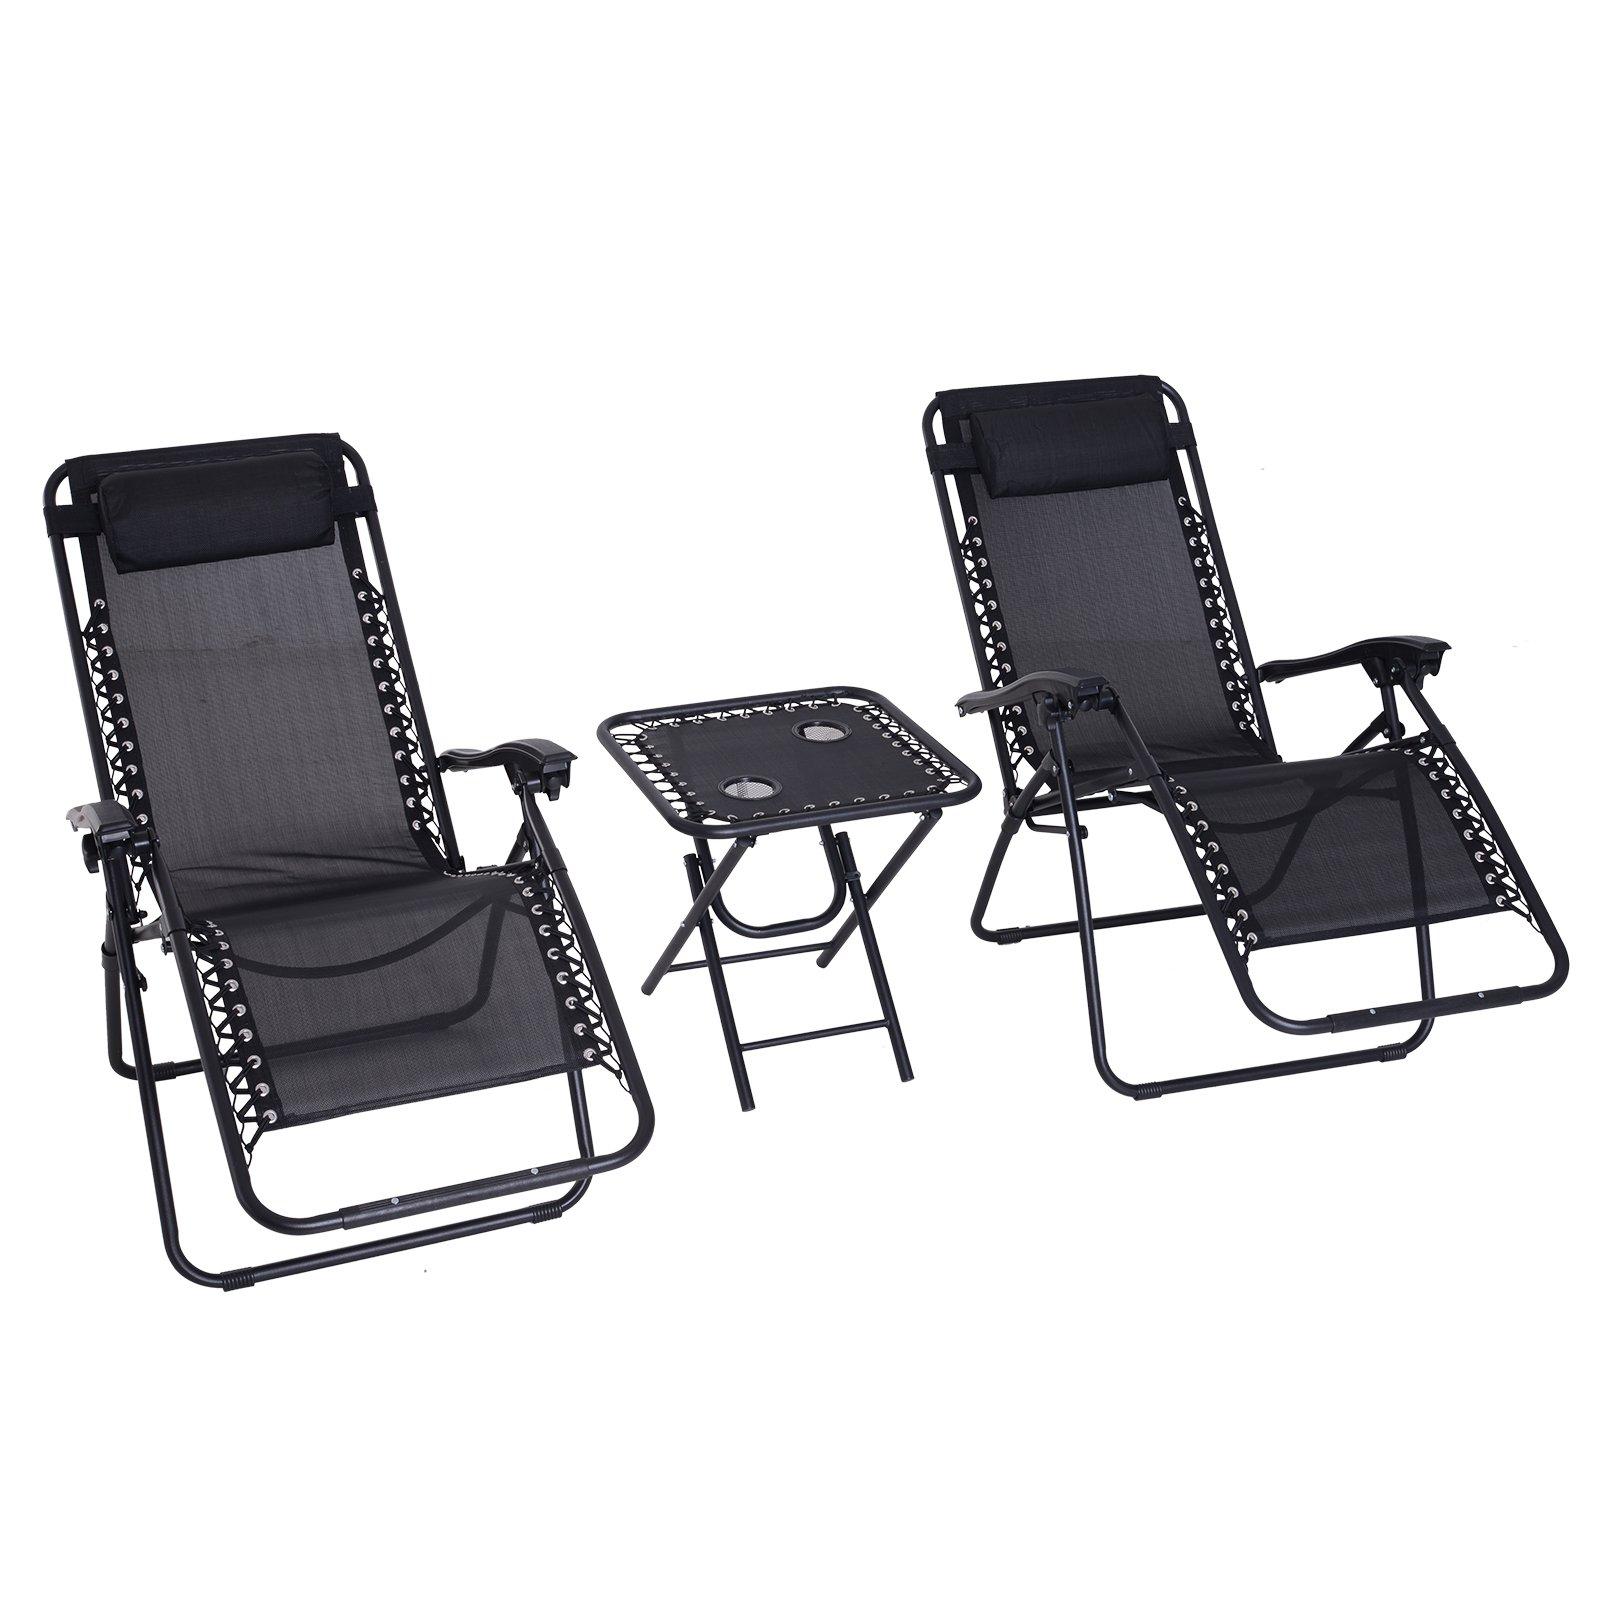 3PC Zero Gravity Chairs Sun Lounger Table Setwith Cup Holders